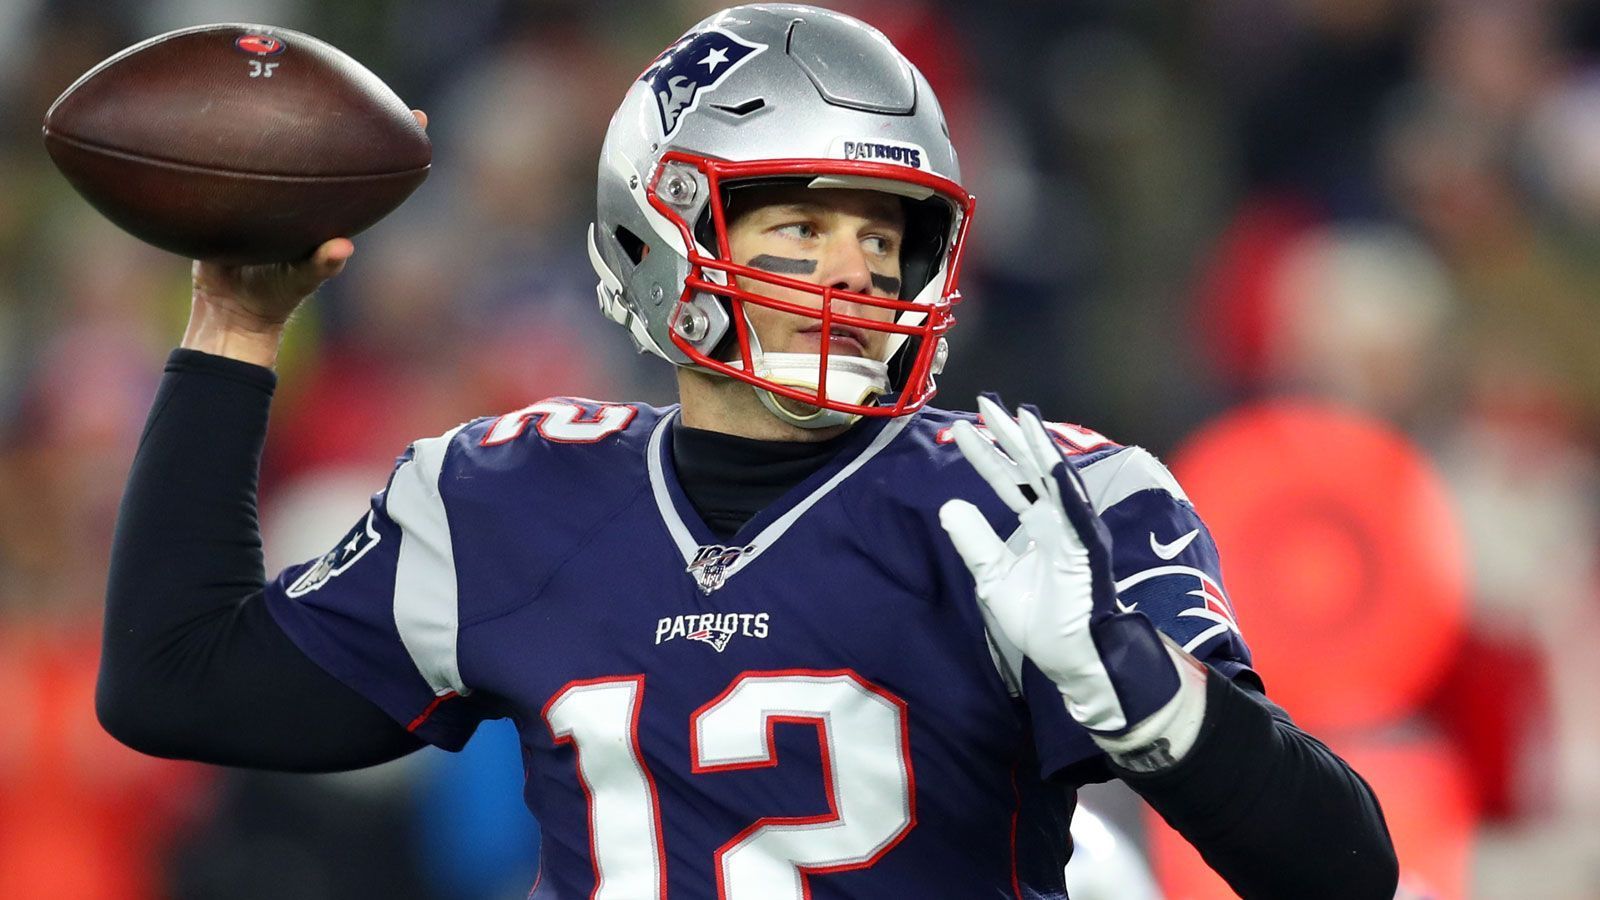 
                <strong>Post-Season-Statistiken (Passing Game)</strong><br>
                Tom Brady vs. Cam NewtonEinsätze: 41 - 7Passing Yards: 11.388 - 1821Pässe: 1626 - 224Completions: 1025 - 134Yards pro Pass: 7 - 8,13Passquote: 63,04% - 59,82%
              